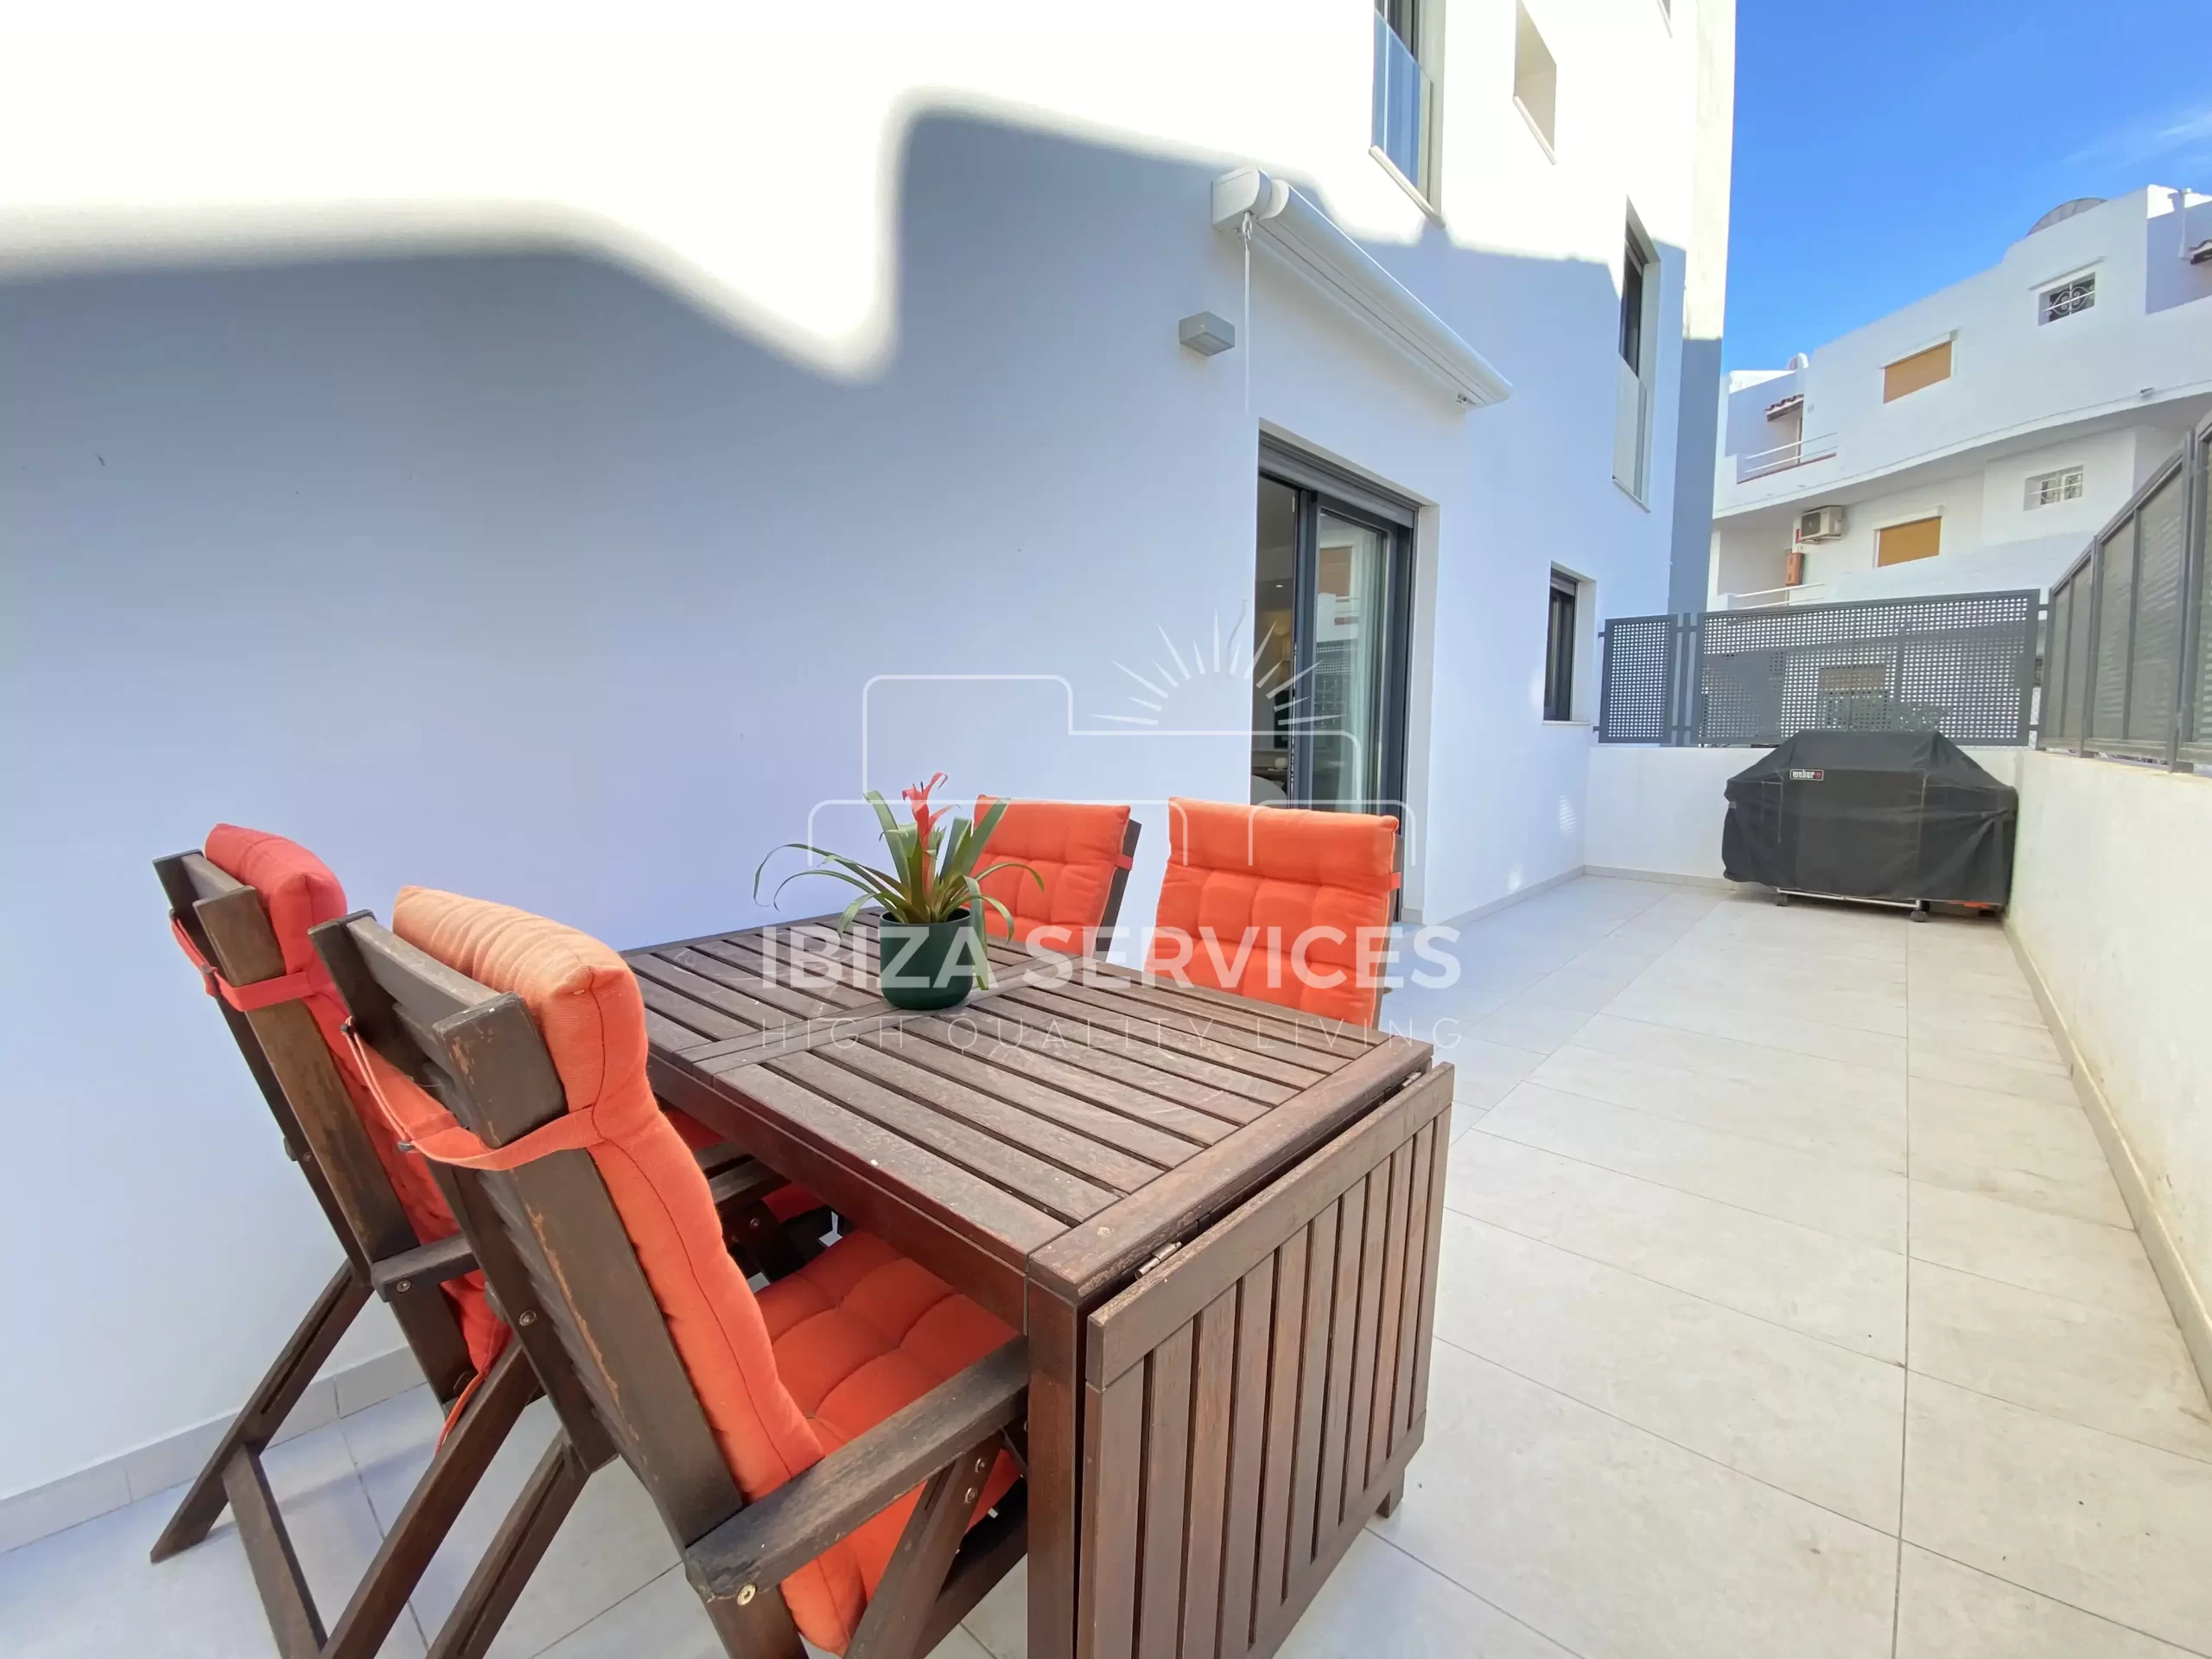 Duplex with 150m, terrace, and communal swimming pool near the beach for sale